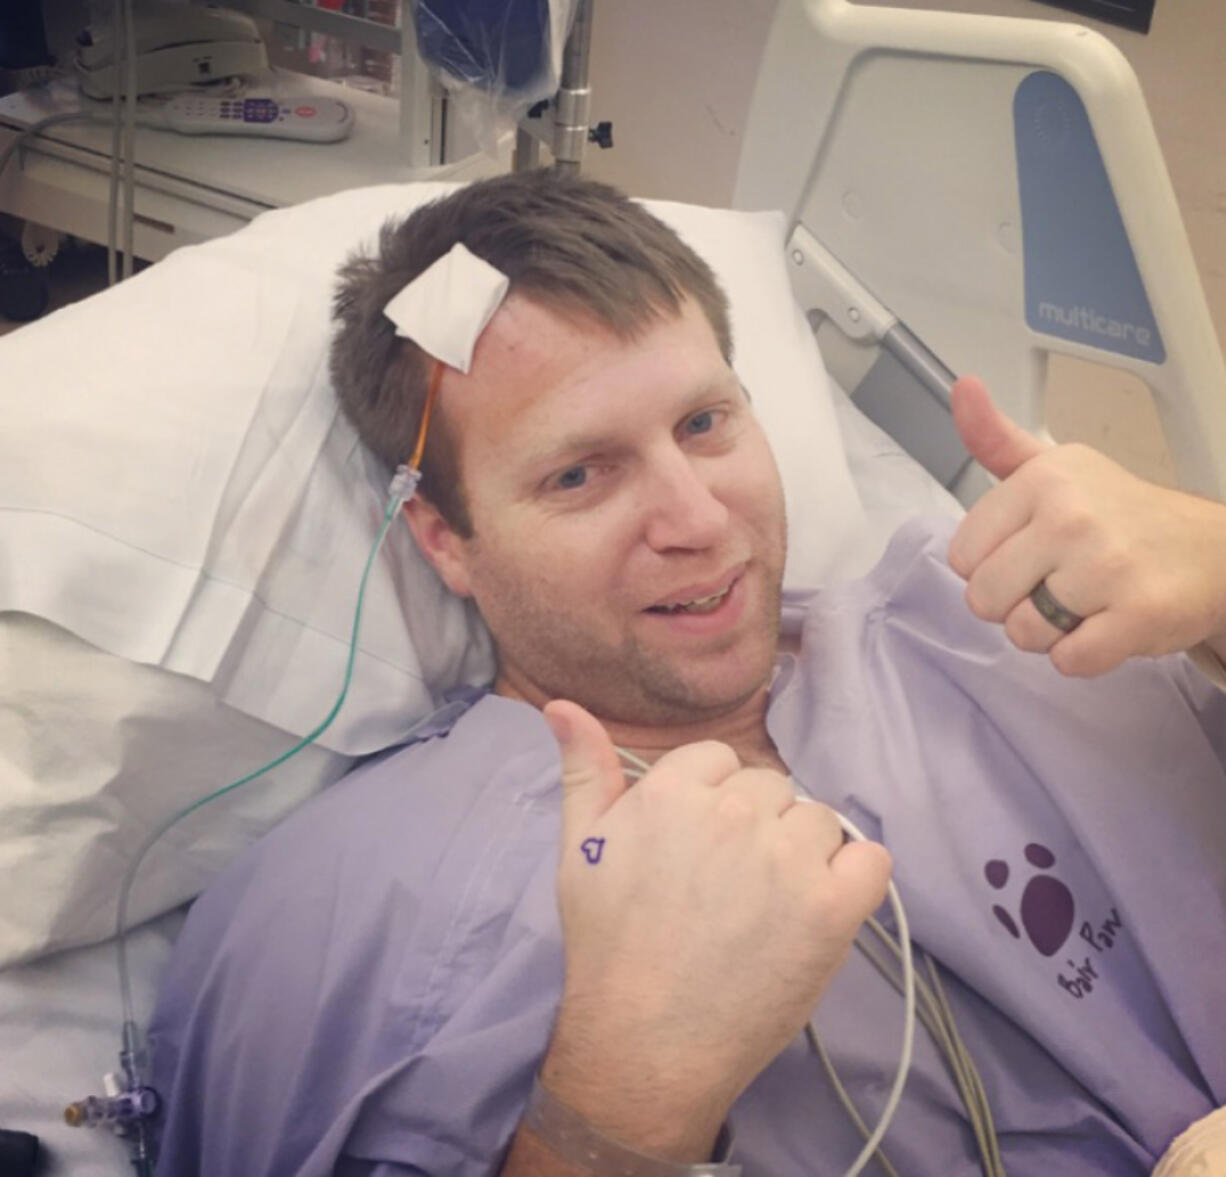 Tony MacDougall, 29, of Vancouver underwent an internal ventriculostomy earlier this month. The procedure created a hole to allow his cerebral spinal fluid to drain.